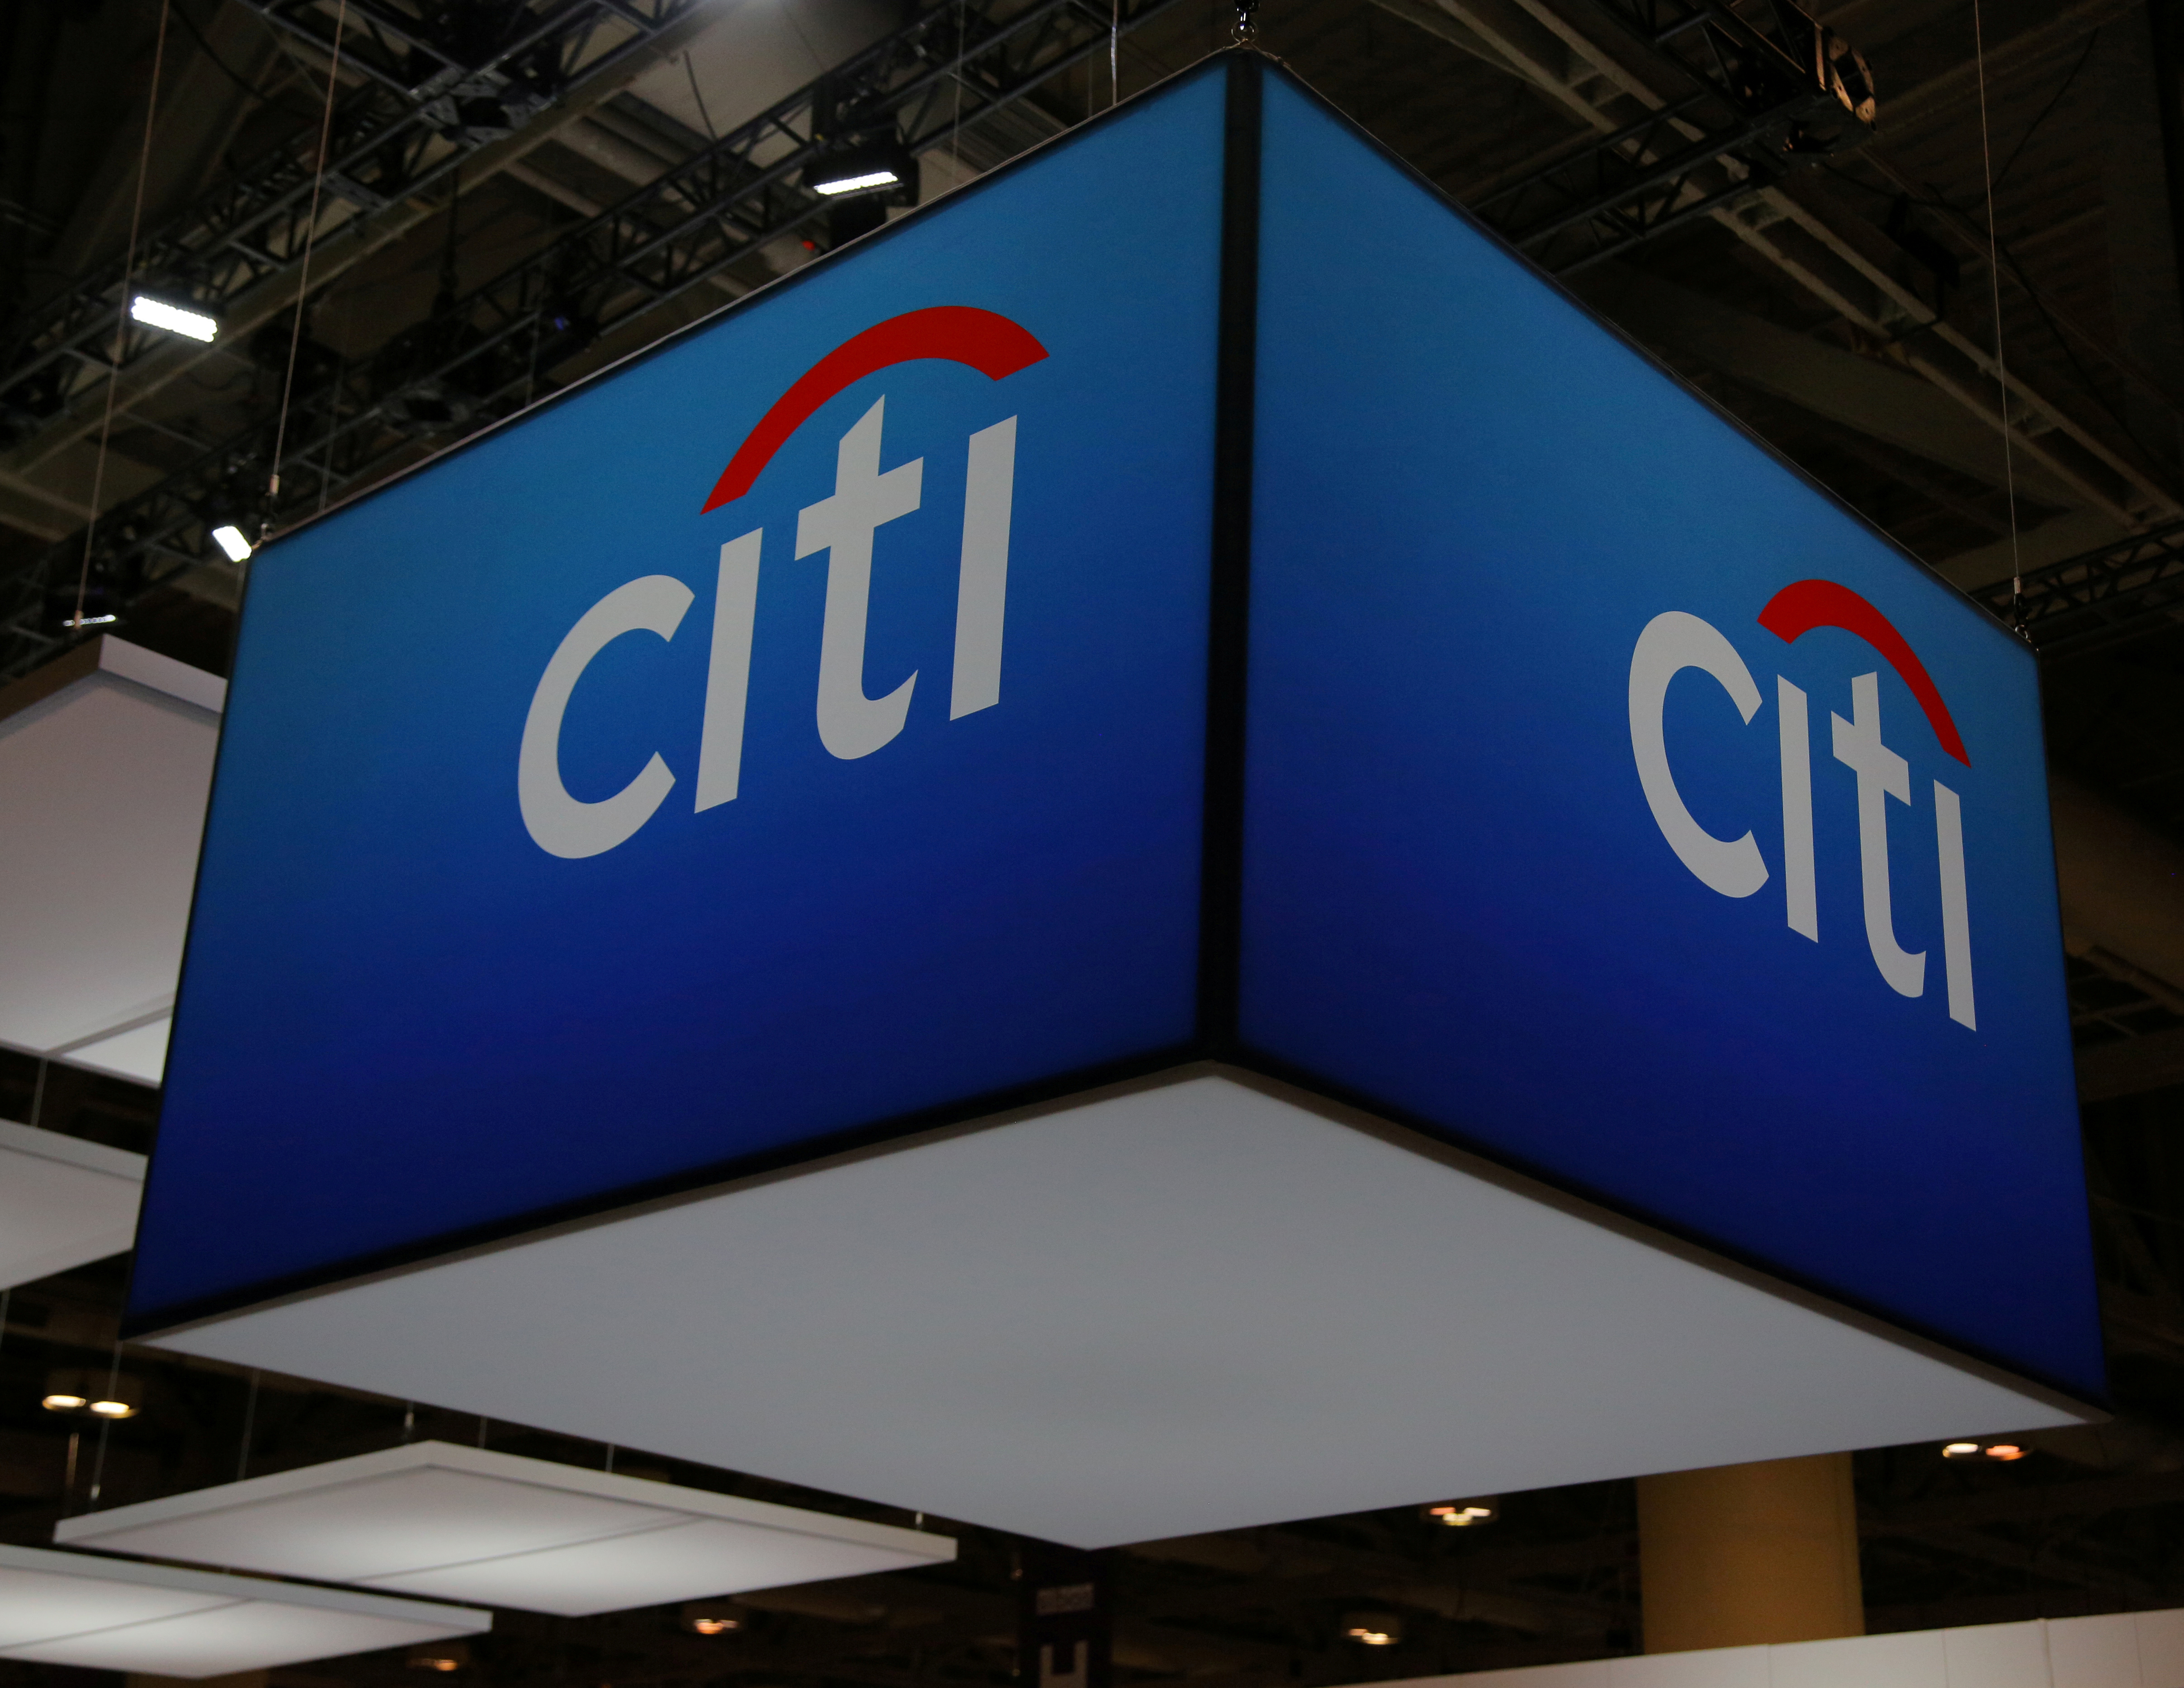 The Citigroup Inc (Citi) logo is seen at the SIBOS banking and financial conference in Toronto, Ontario, Canada October 19, 2017. Picture taken October 19, 2017. REUTERS/Chris Helgren/File Photo